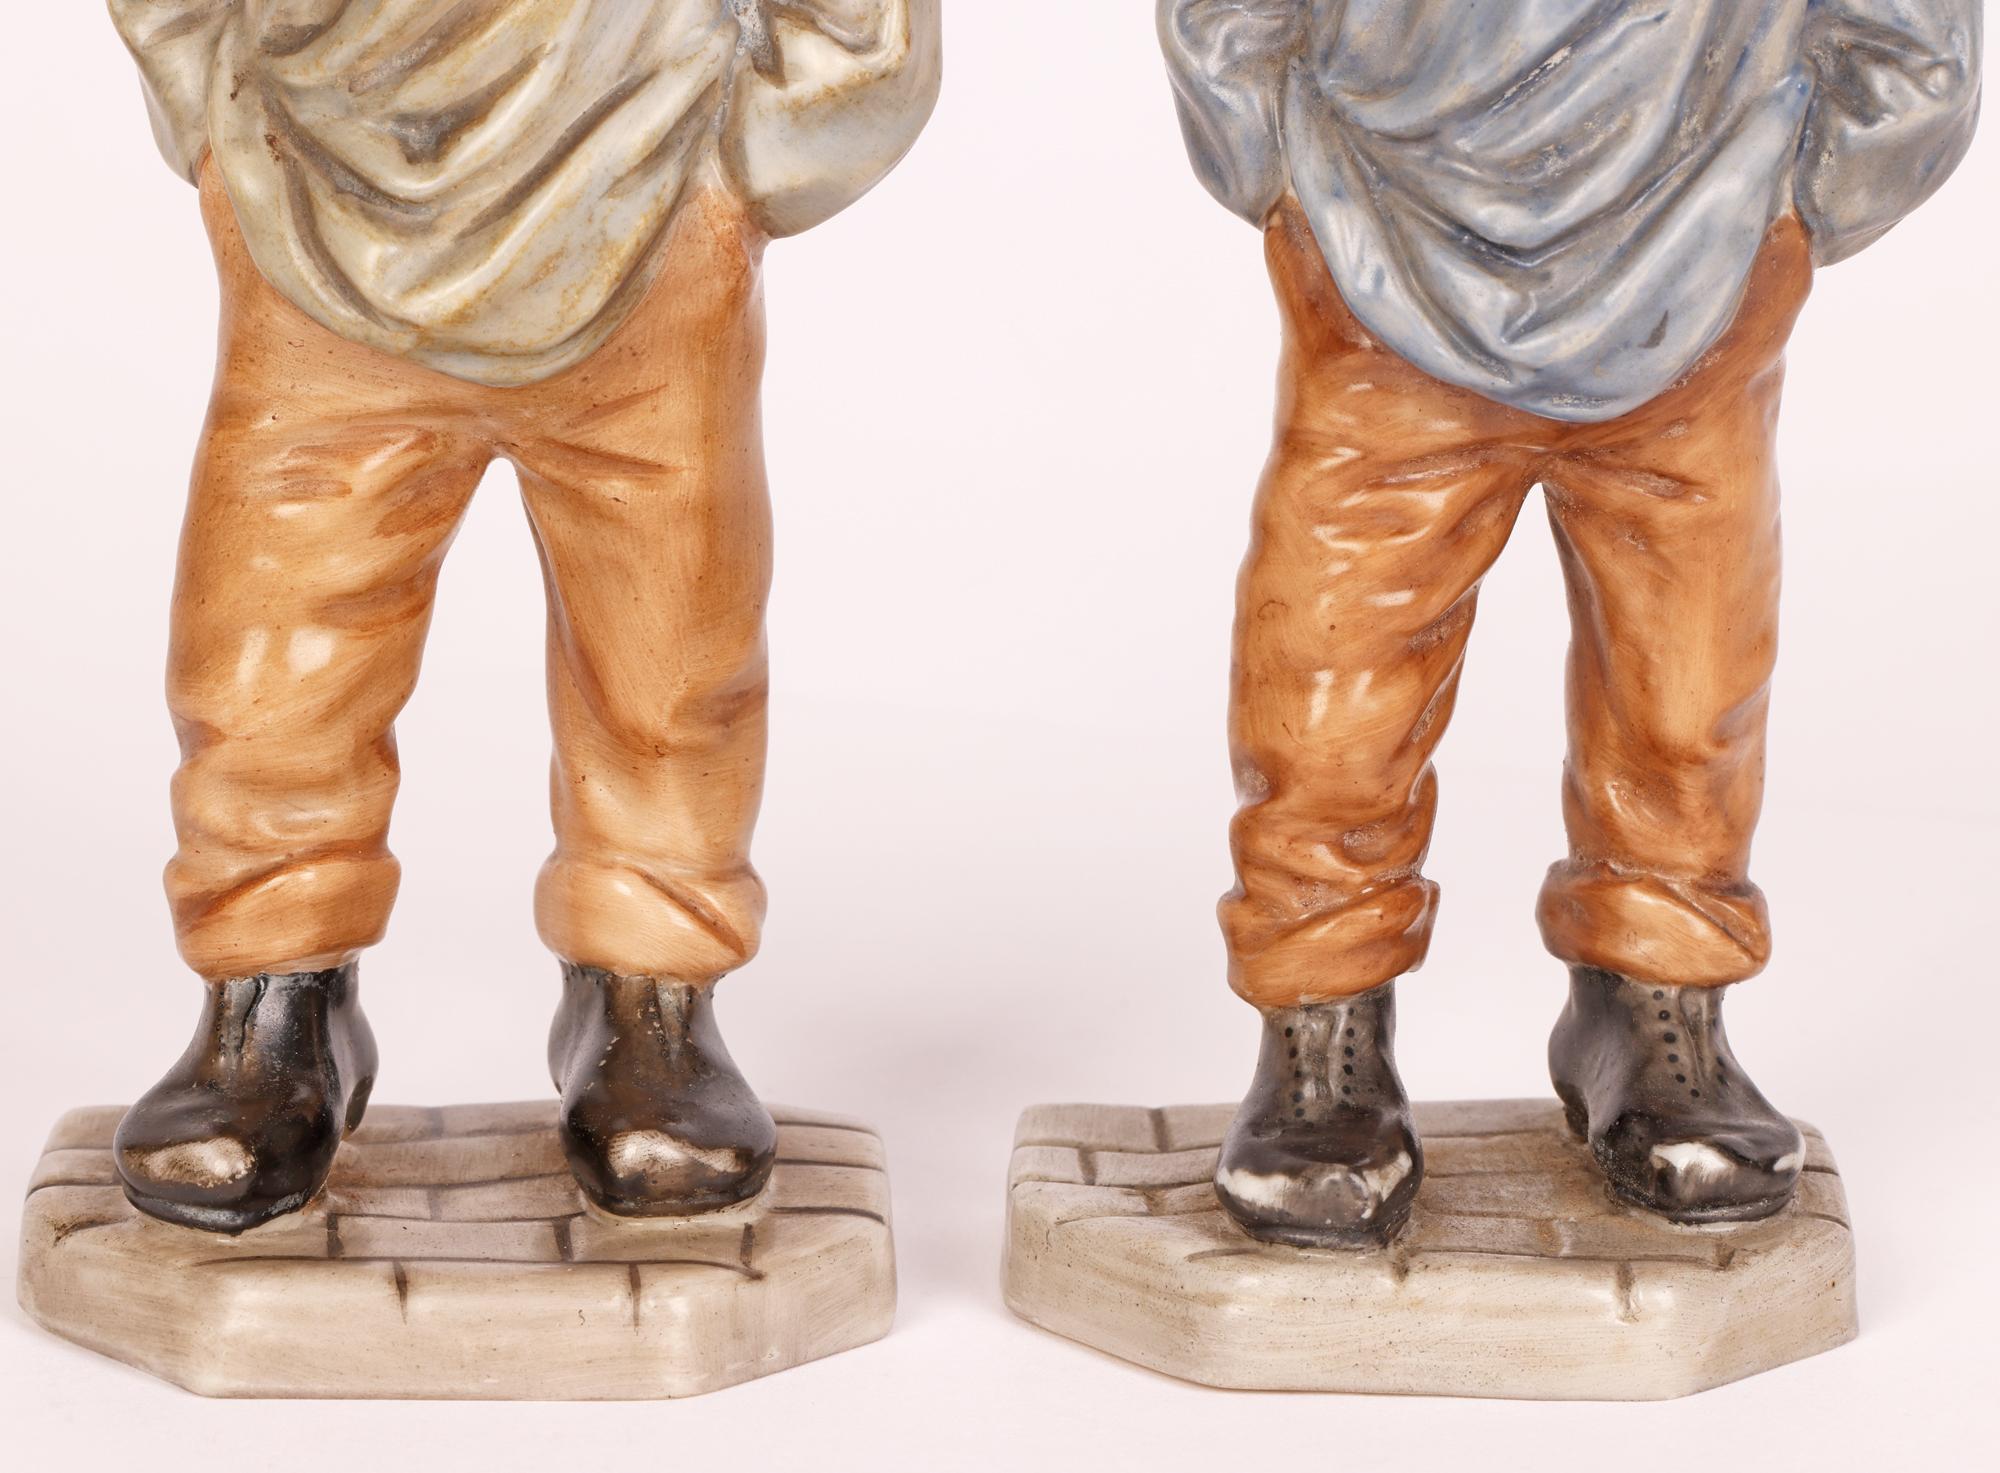 A scarce and delightful pair Royal Worcester porcelain Chinaman figures made as part of a Down & Out series of figures produced as menu holders in 1874. The figures stand on a shaped block work patterned base and wear heavy worn black shoes with an